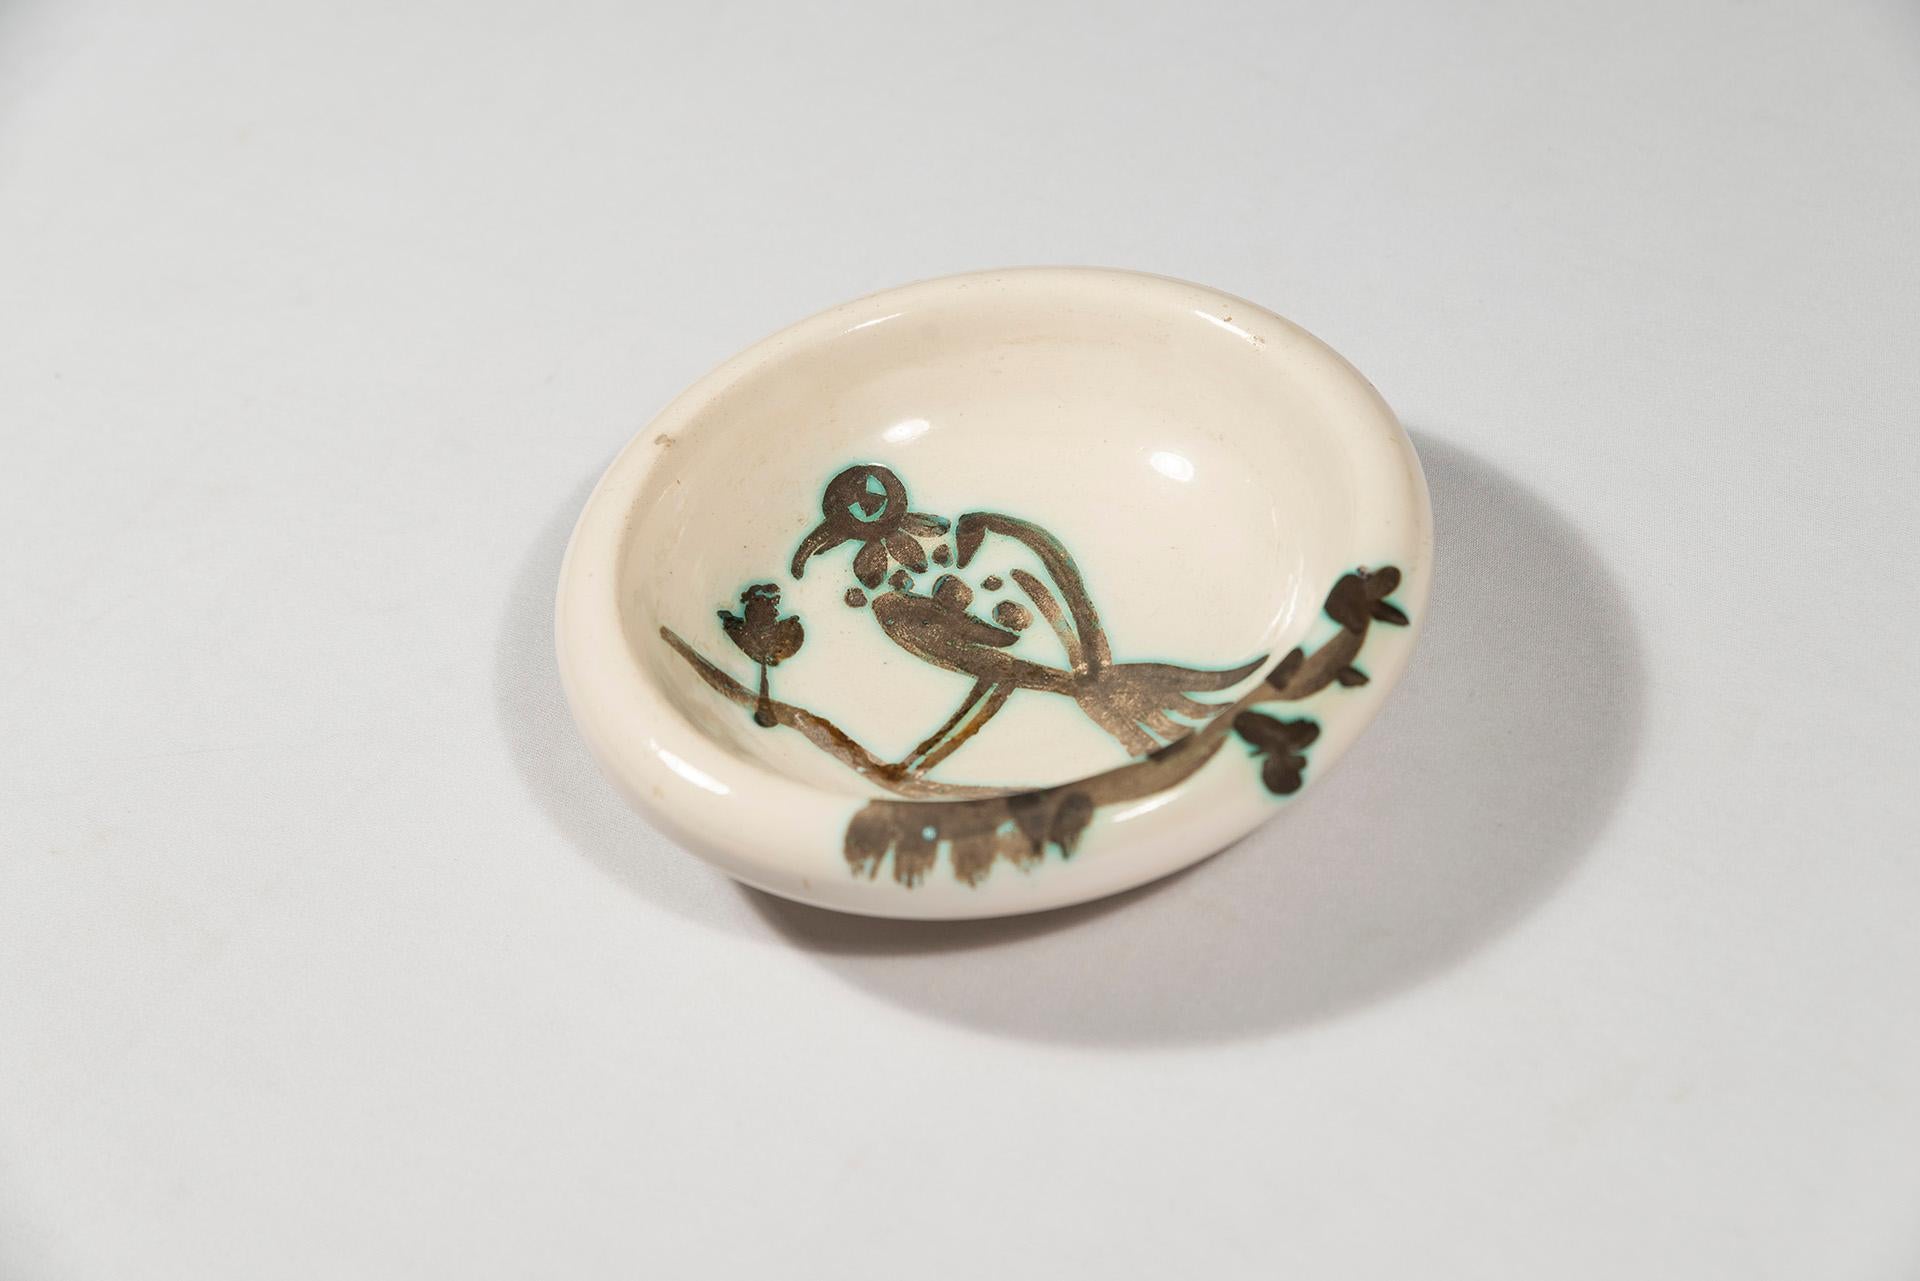 Pablo Picasso Madoura, Oiseau sur la branche, 1952, stamped and marked edition Picasso and Madoura.
Edition Picasso. Partially glazed ceramic.

Measures: Diameter 14.5 cm.

Biography: Similar model page 95, N°175, Alain Ramie, Picasso and Madoura: